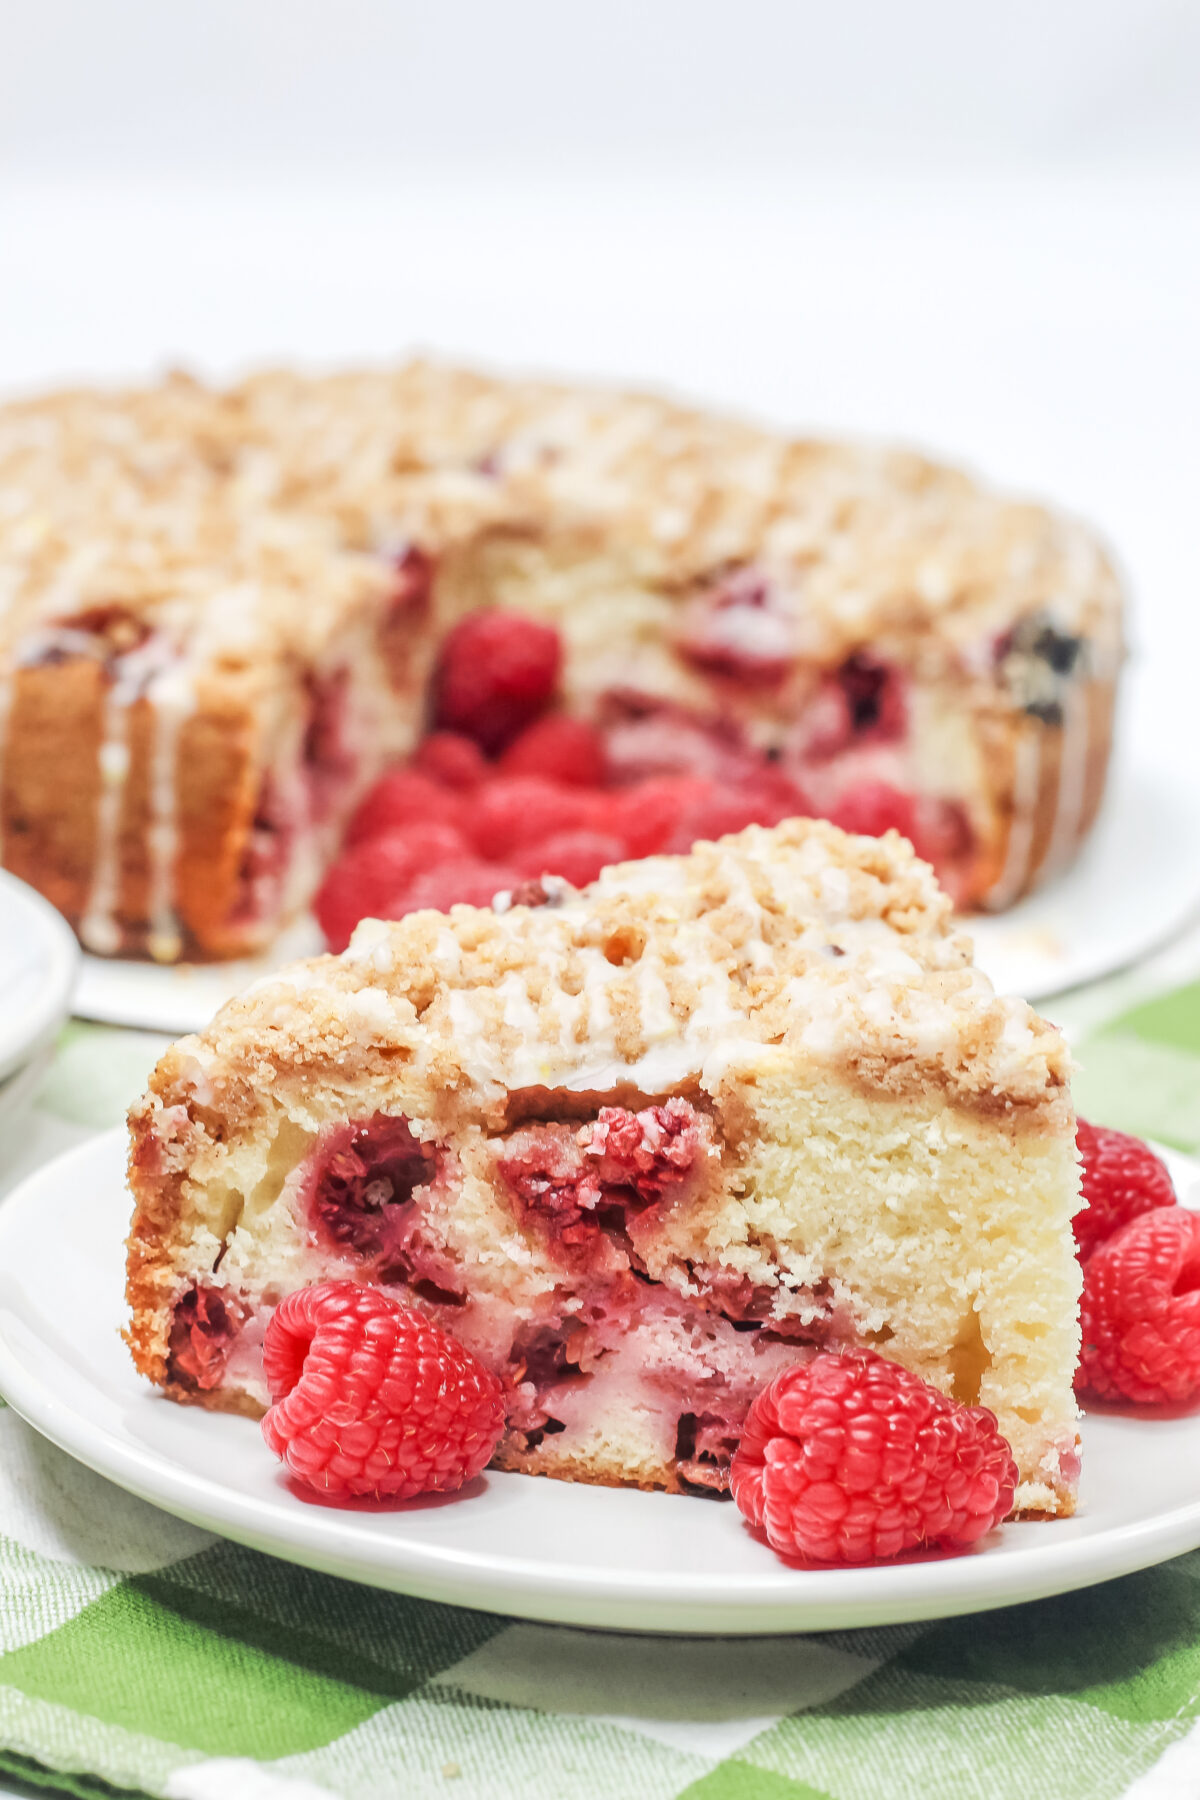 This Raspberry Crumble Cake features a tender cake dotted with fresh raspberries, topped with crumble, and drizzled over with a lemon glaze.